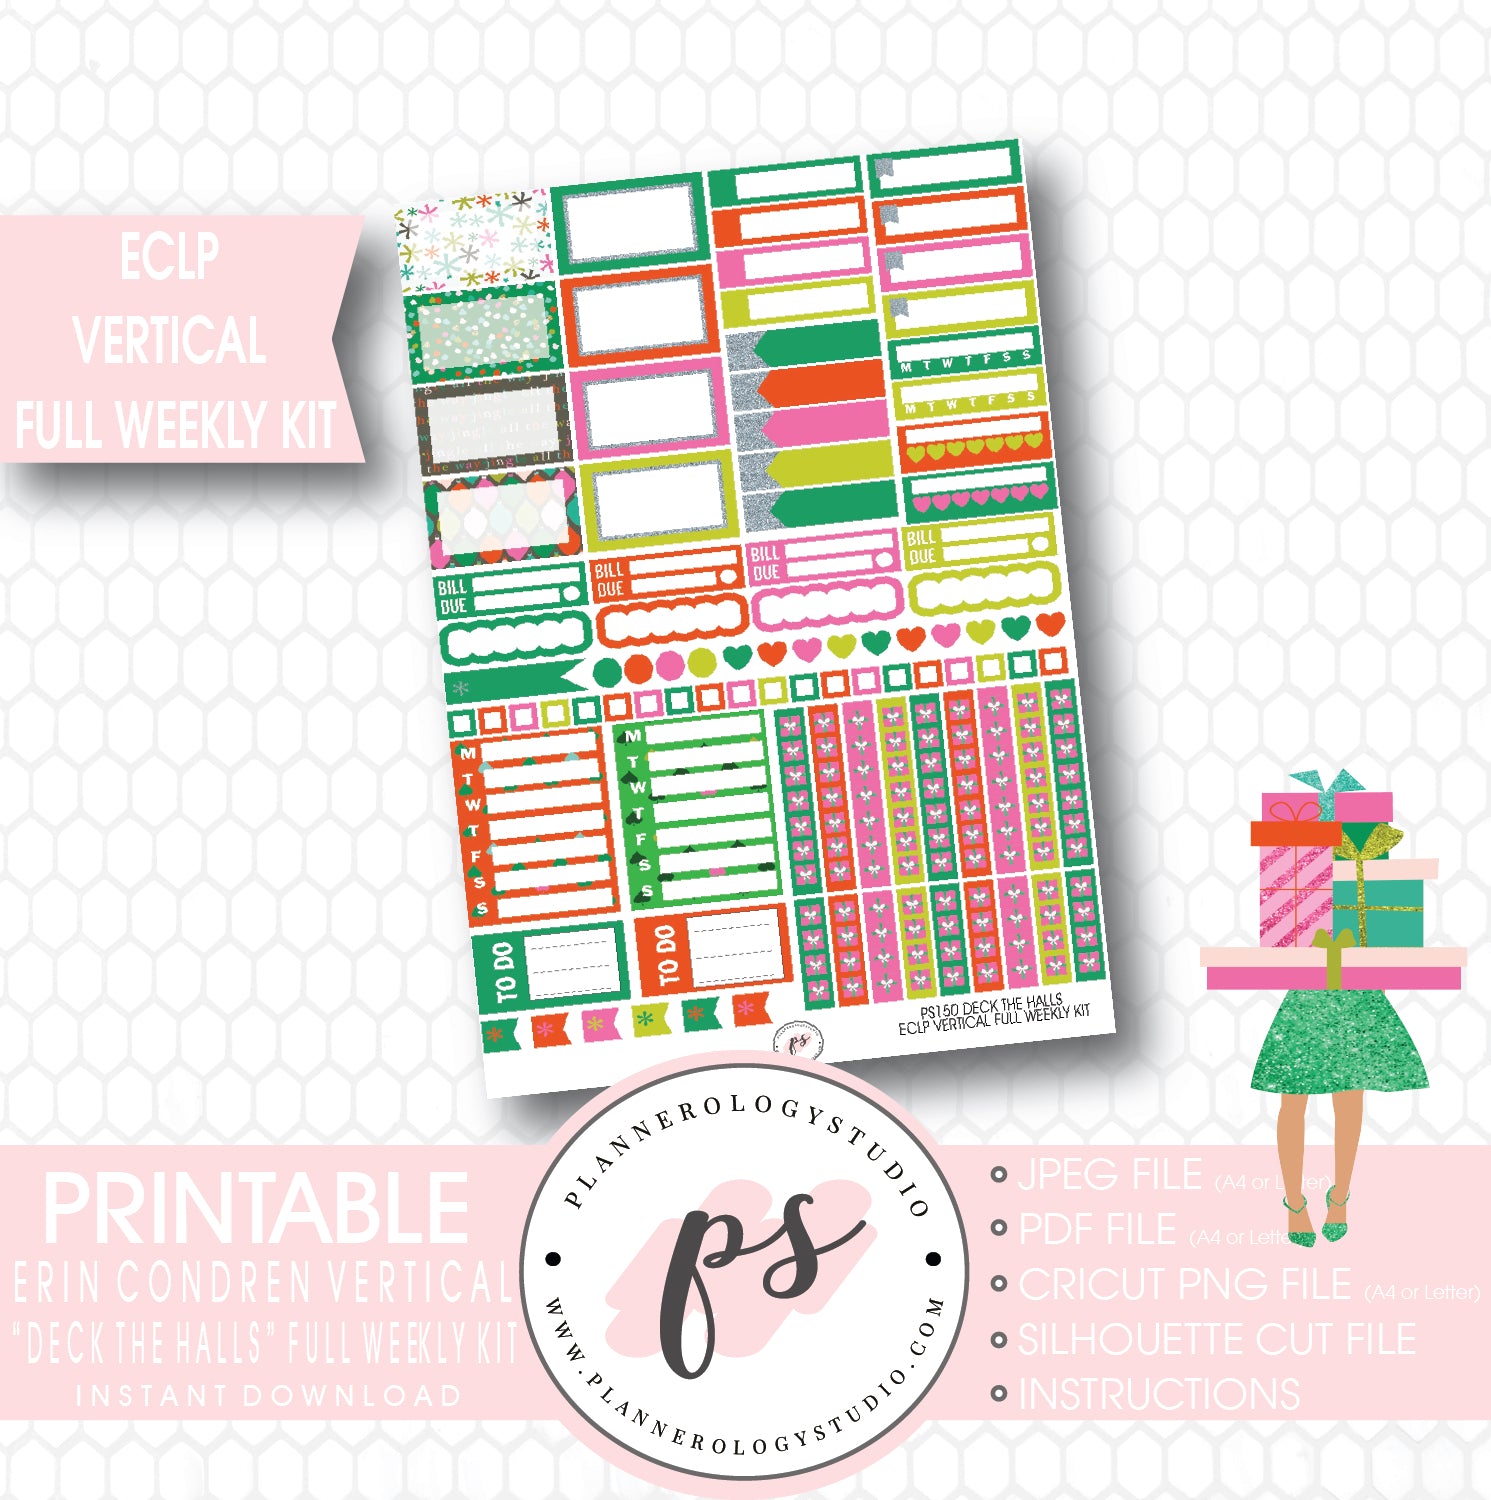 Deck the Halls Christmas Full Weekly Kit Printable Planner Stickers (for use with ECLP Vertical) - Plannerologystudio